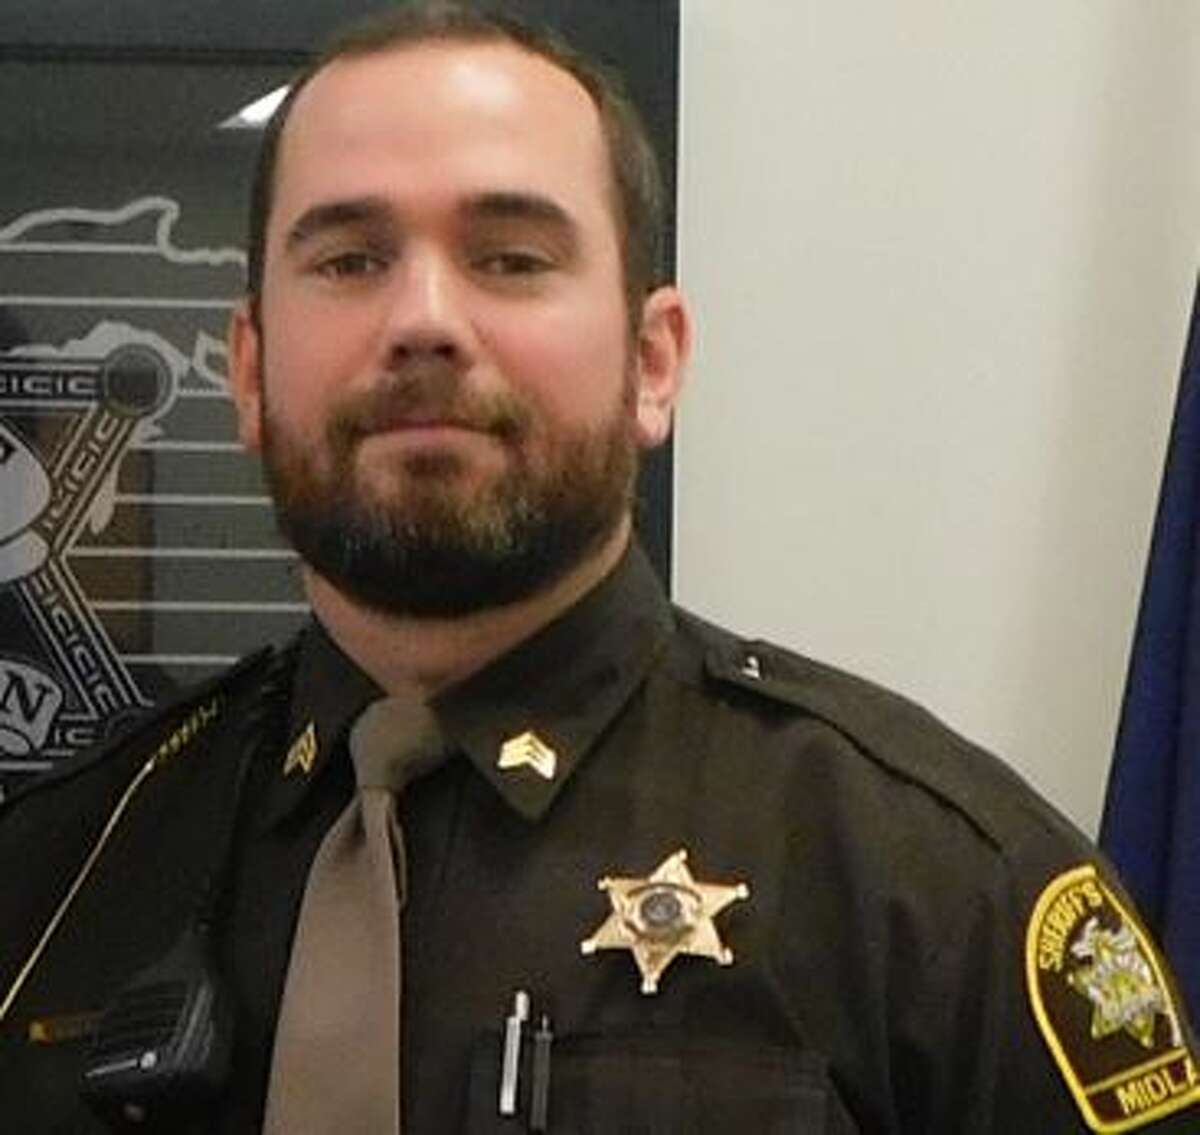 The 2021 campaign named Sergeant Kendal Kobel's beard "the best" during the Midland County Sheriff's office 2021 "No Shave November" campaign. 